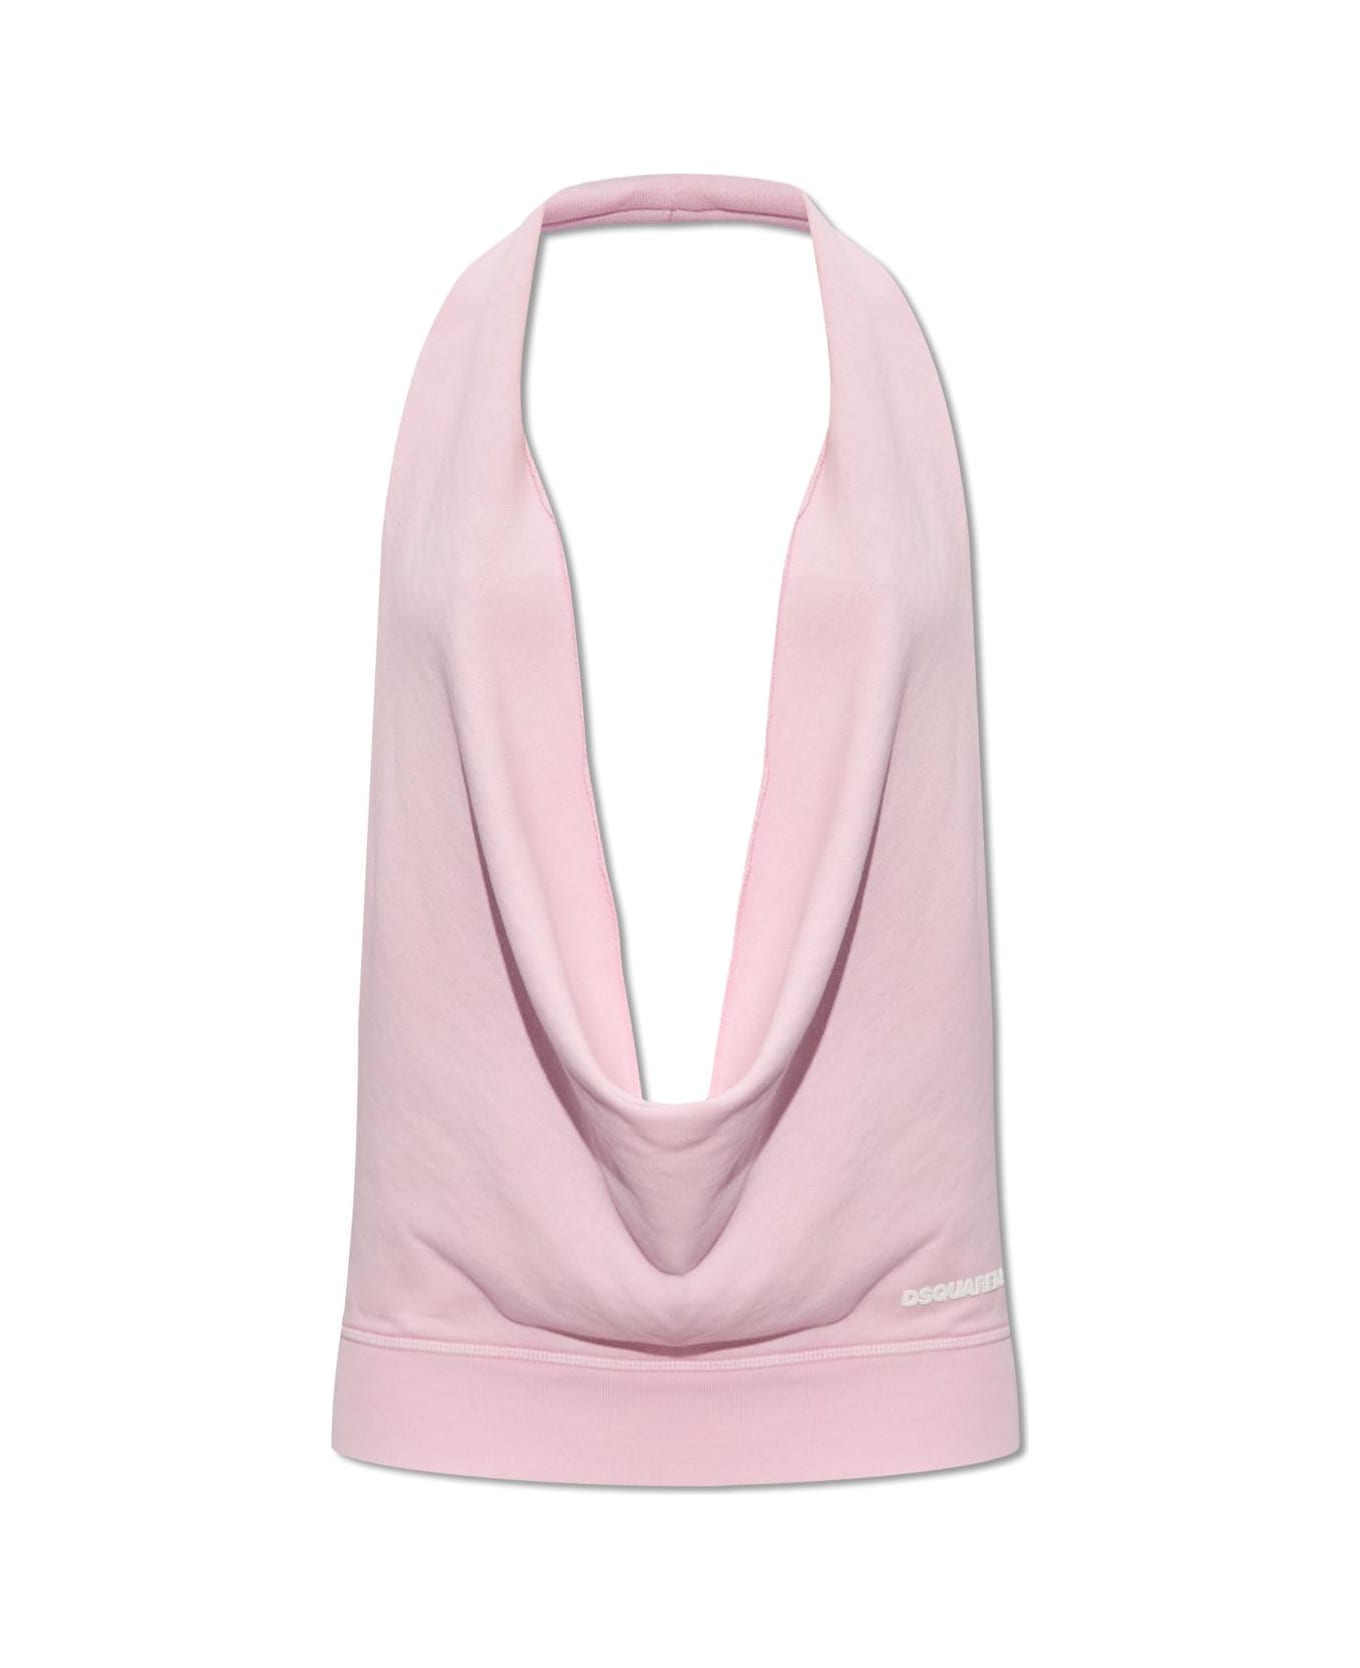 Dsquared2 Top With Halter Neck - Lilac